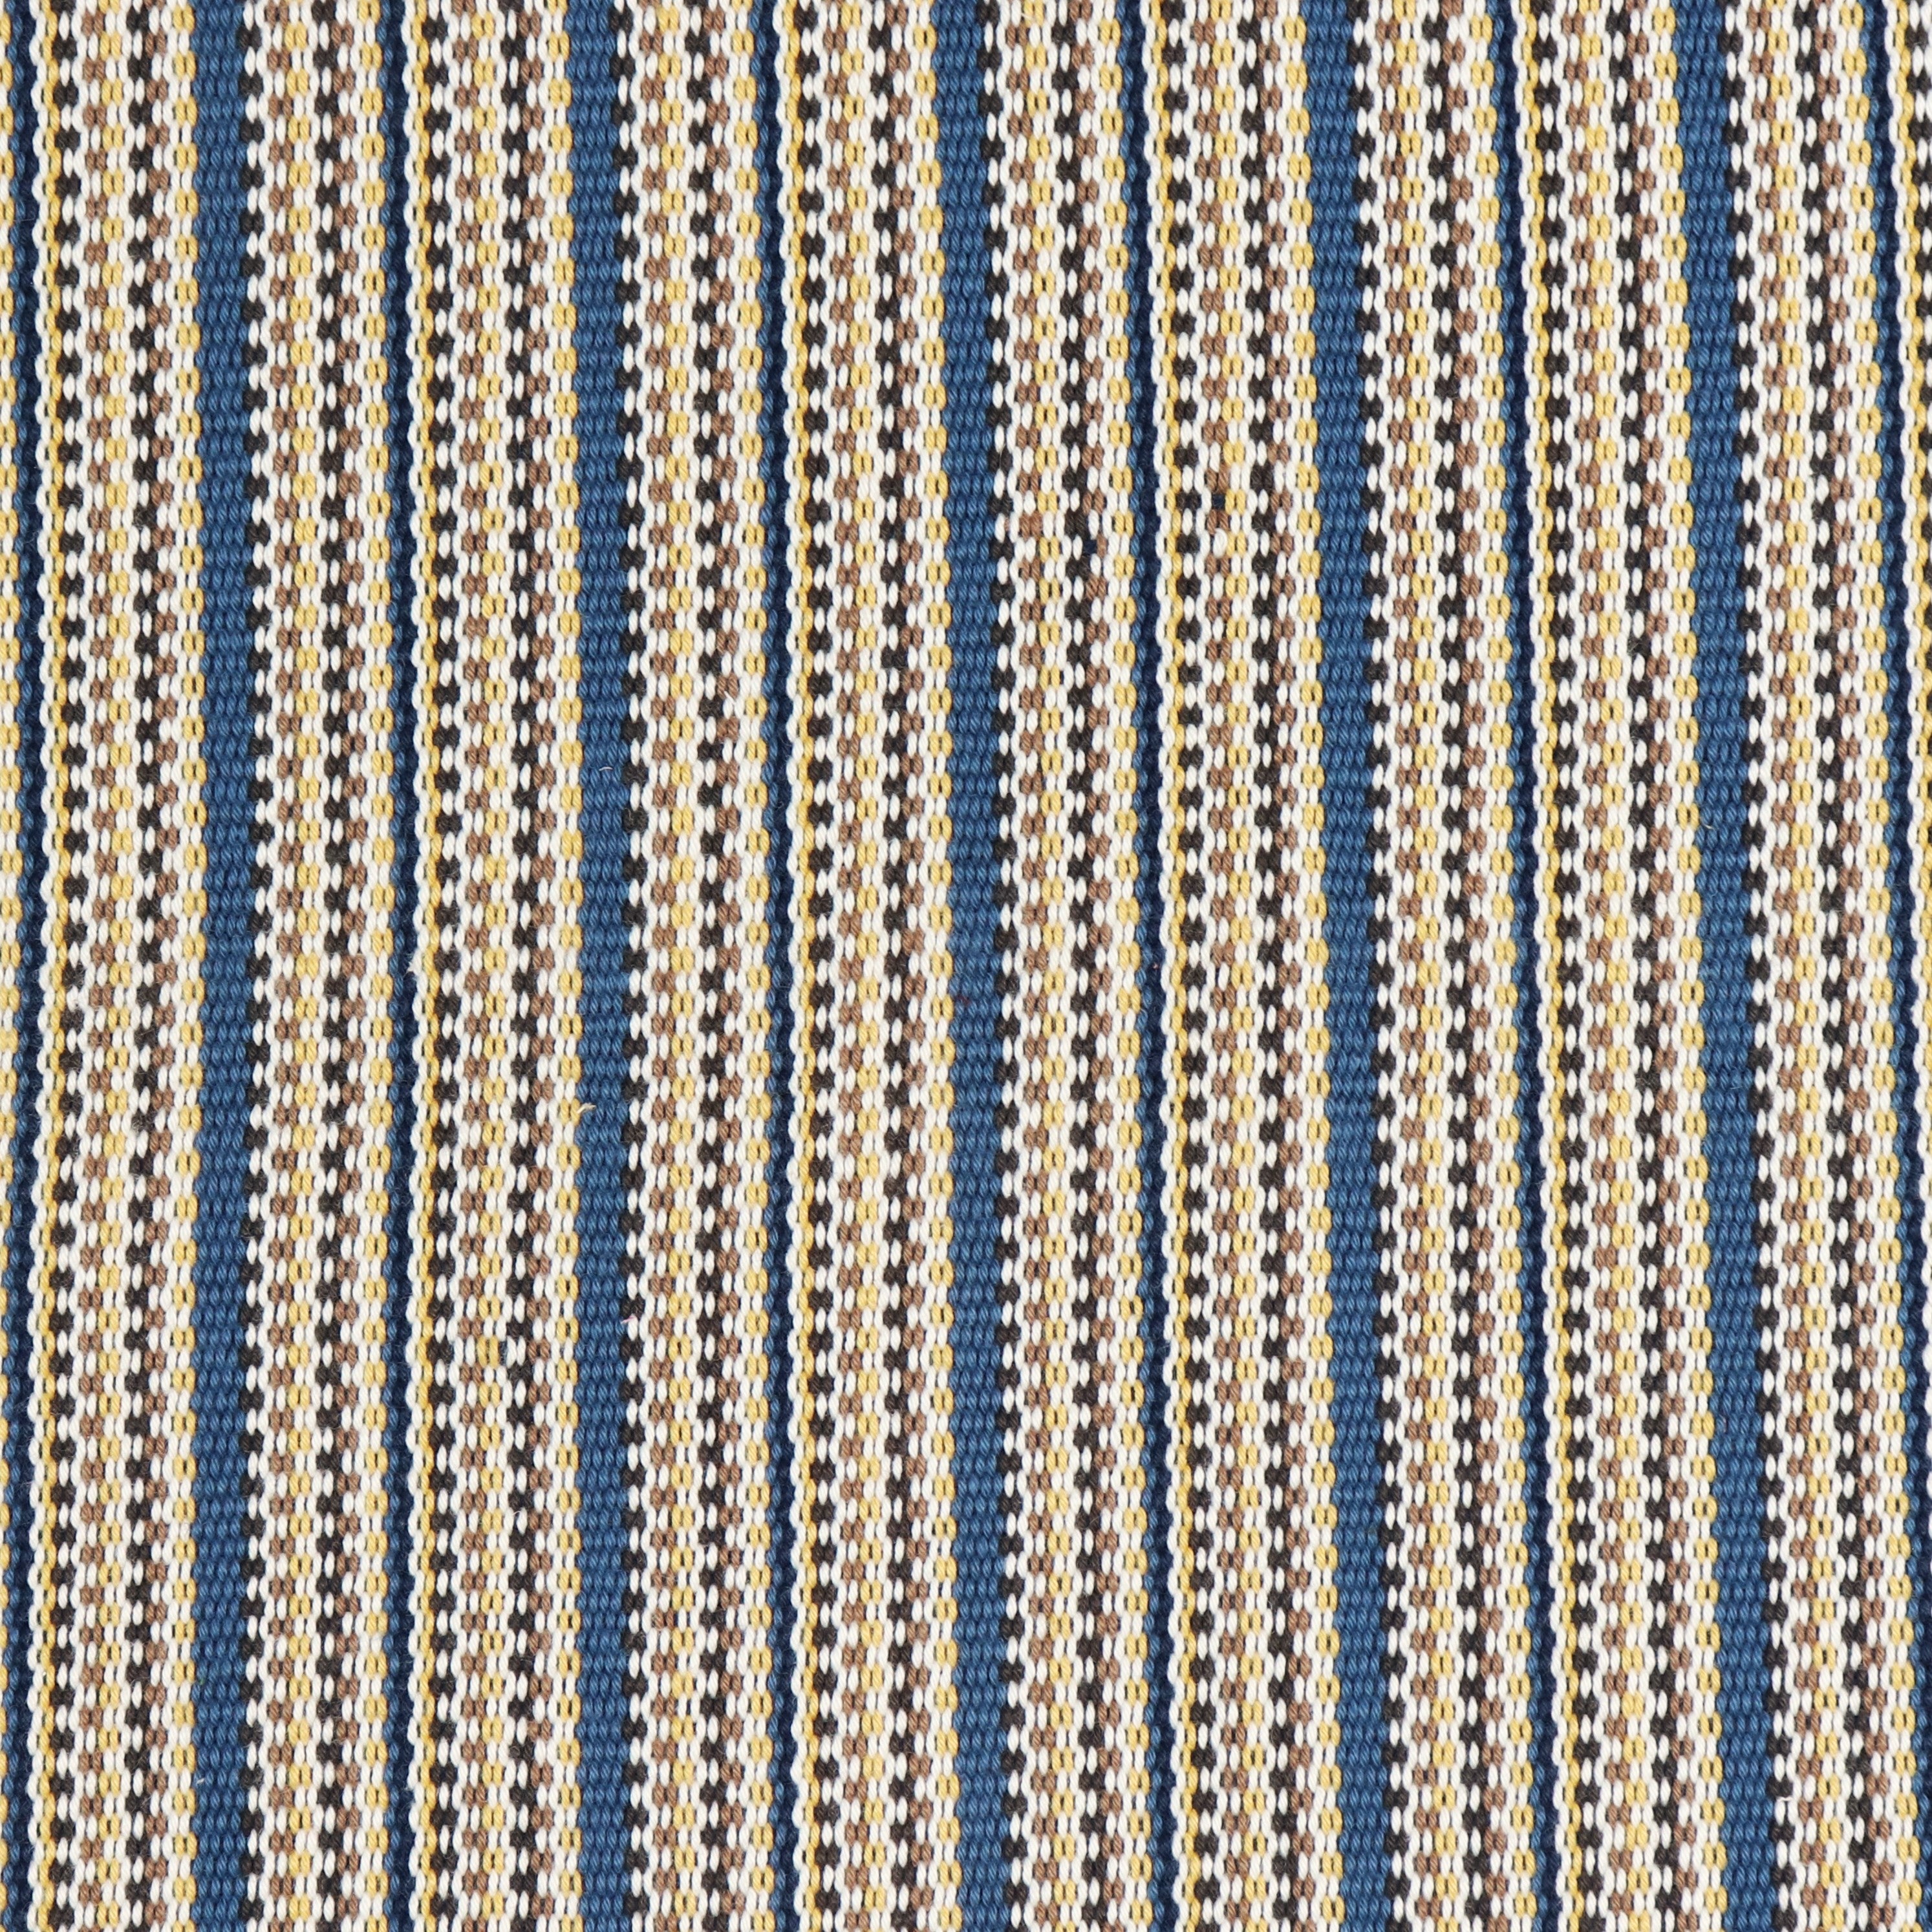 Detail of a hand-woven cotton fabric in an intricate gridded stripe pattern in shades of blue, brown, yellow and white.